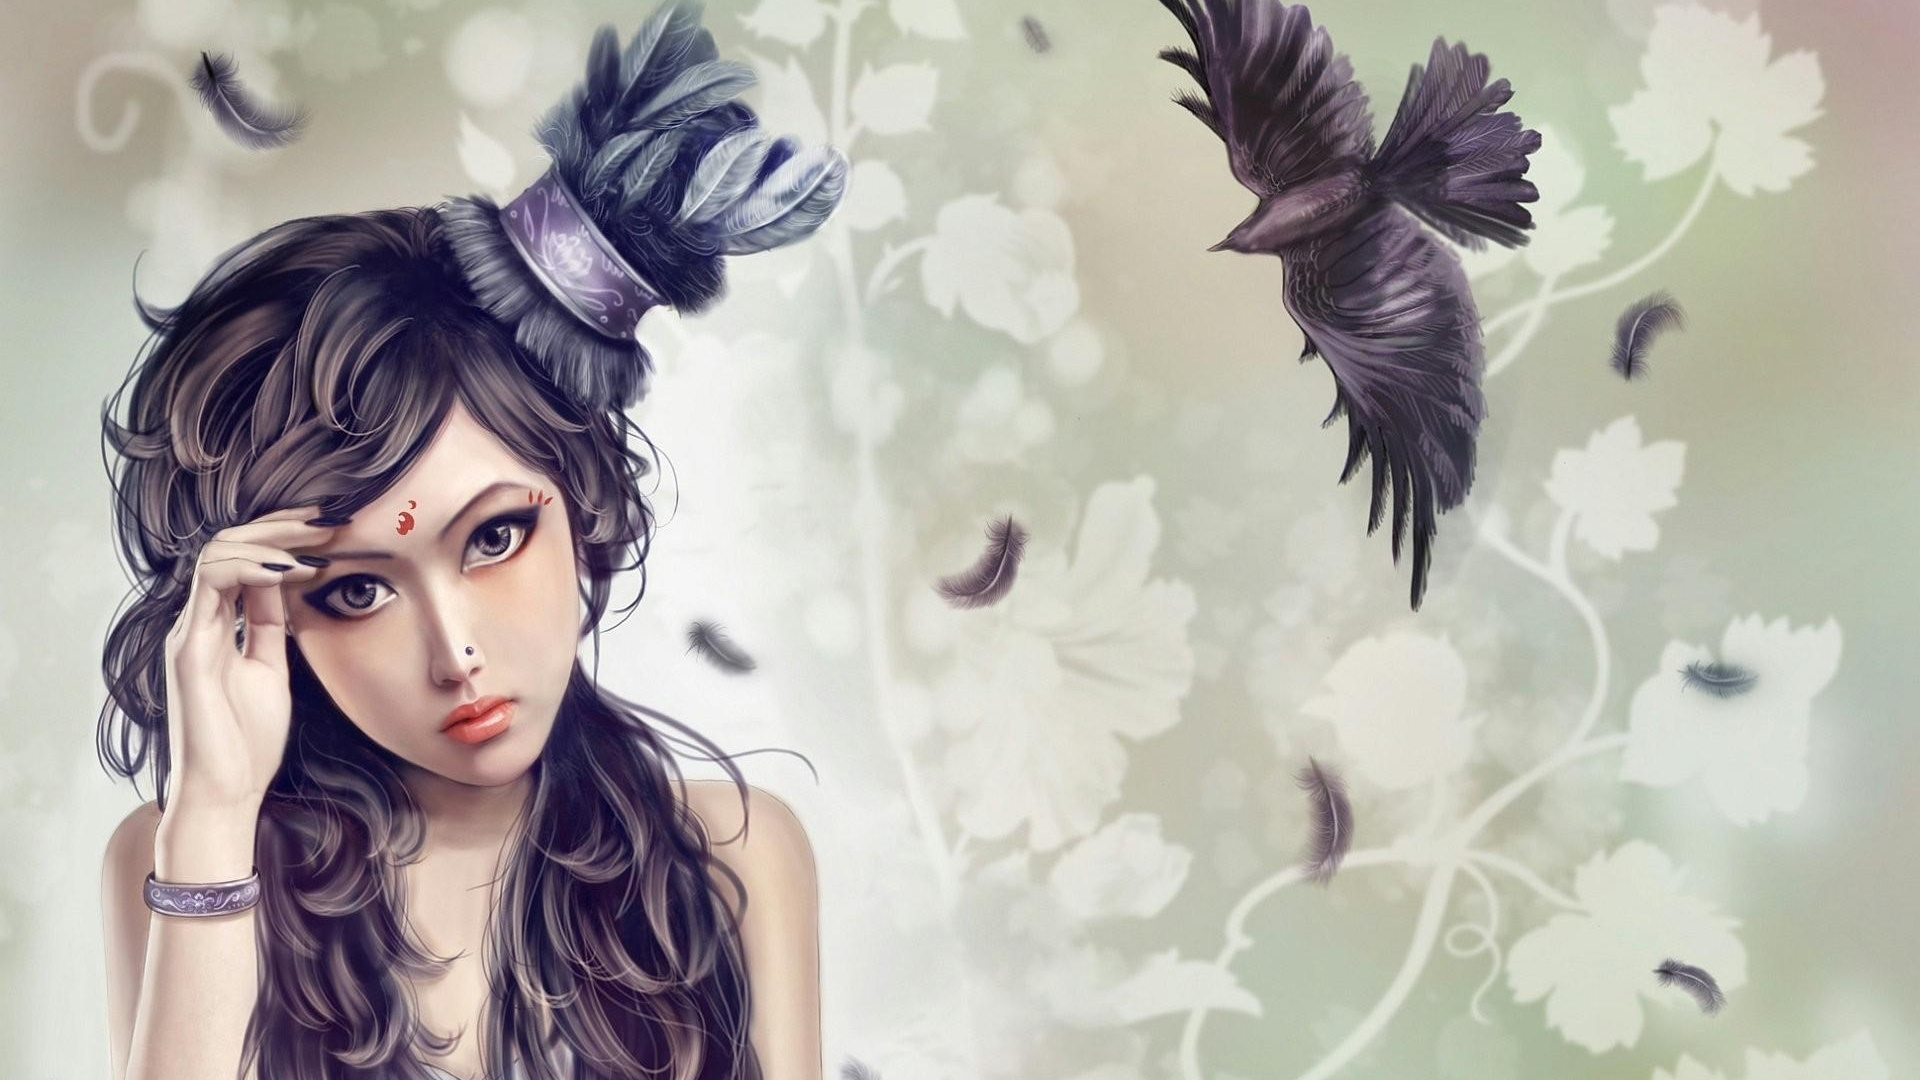 Woman With Black Wings and Black Wings. Wallpaper in 1920x1080 Resolution